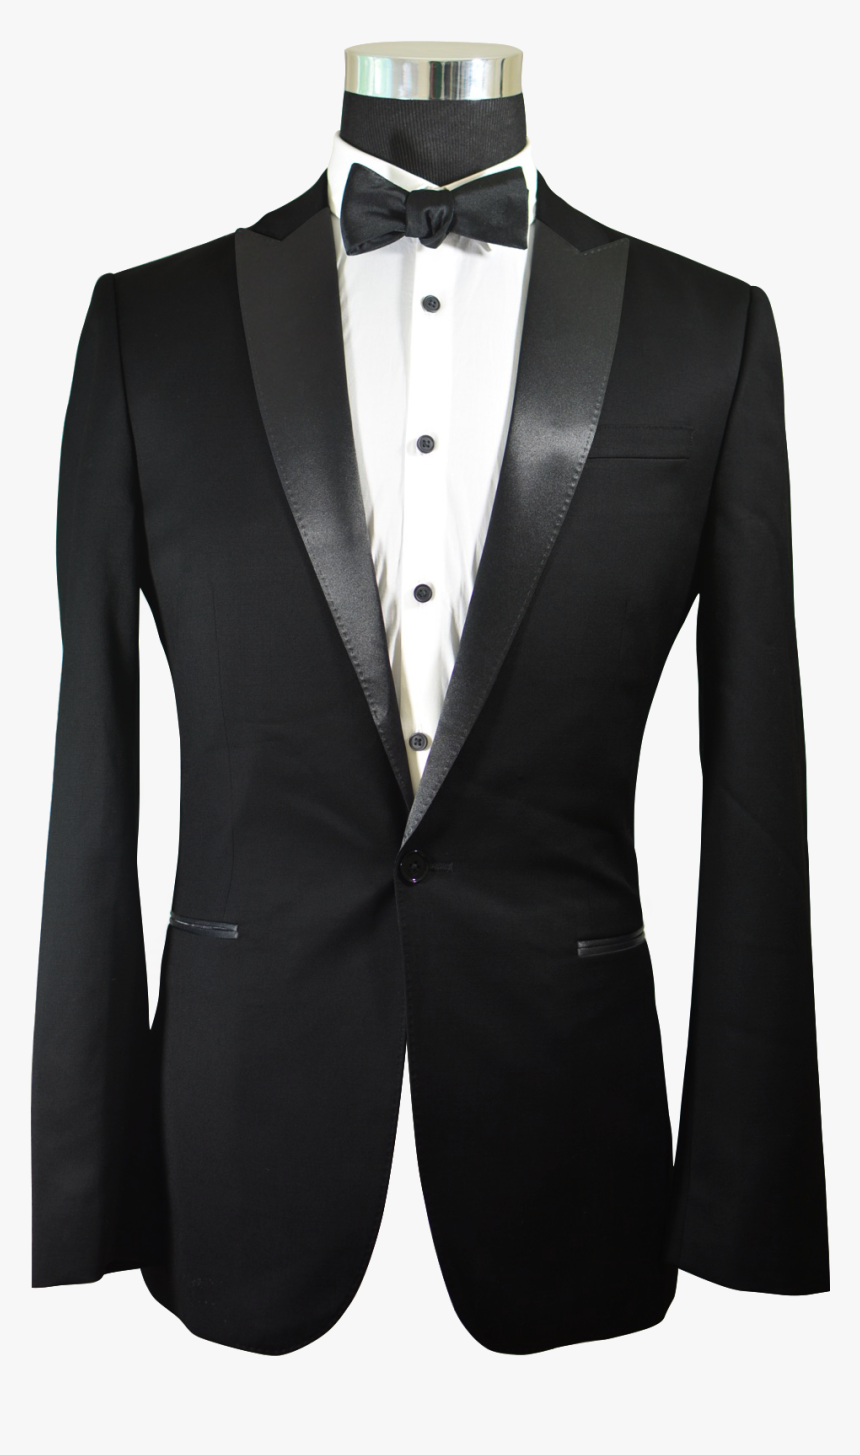 The Regal Black Tuxedo"
 Class= - Color With Navy Blue Tuxedo, HD Png Download, Free Download